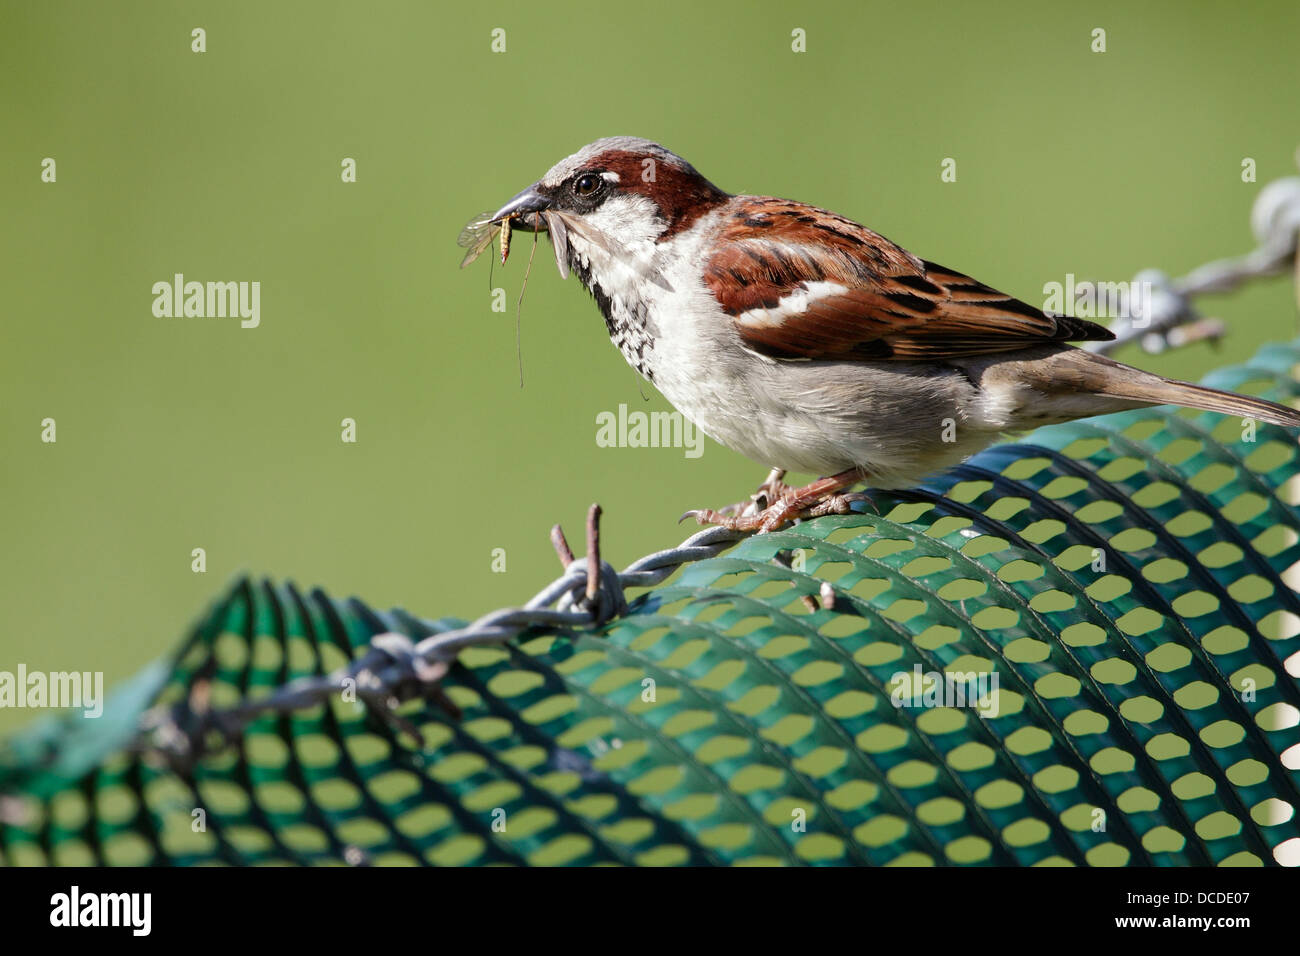 A male House Sparrow (Passer domesticus) about to return to its nest with insects to feed to its chicks. Stock Photo